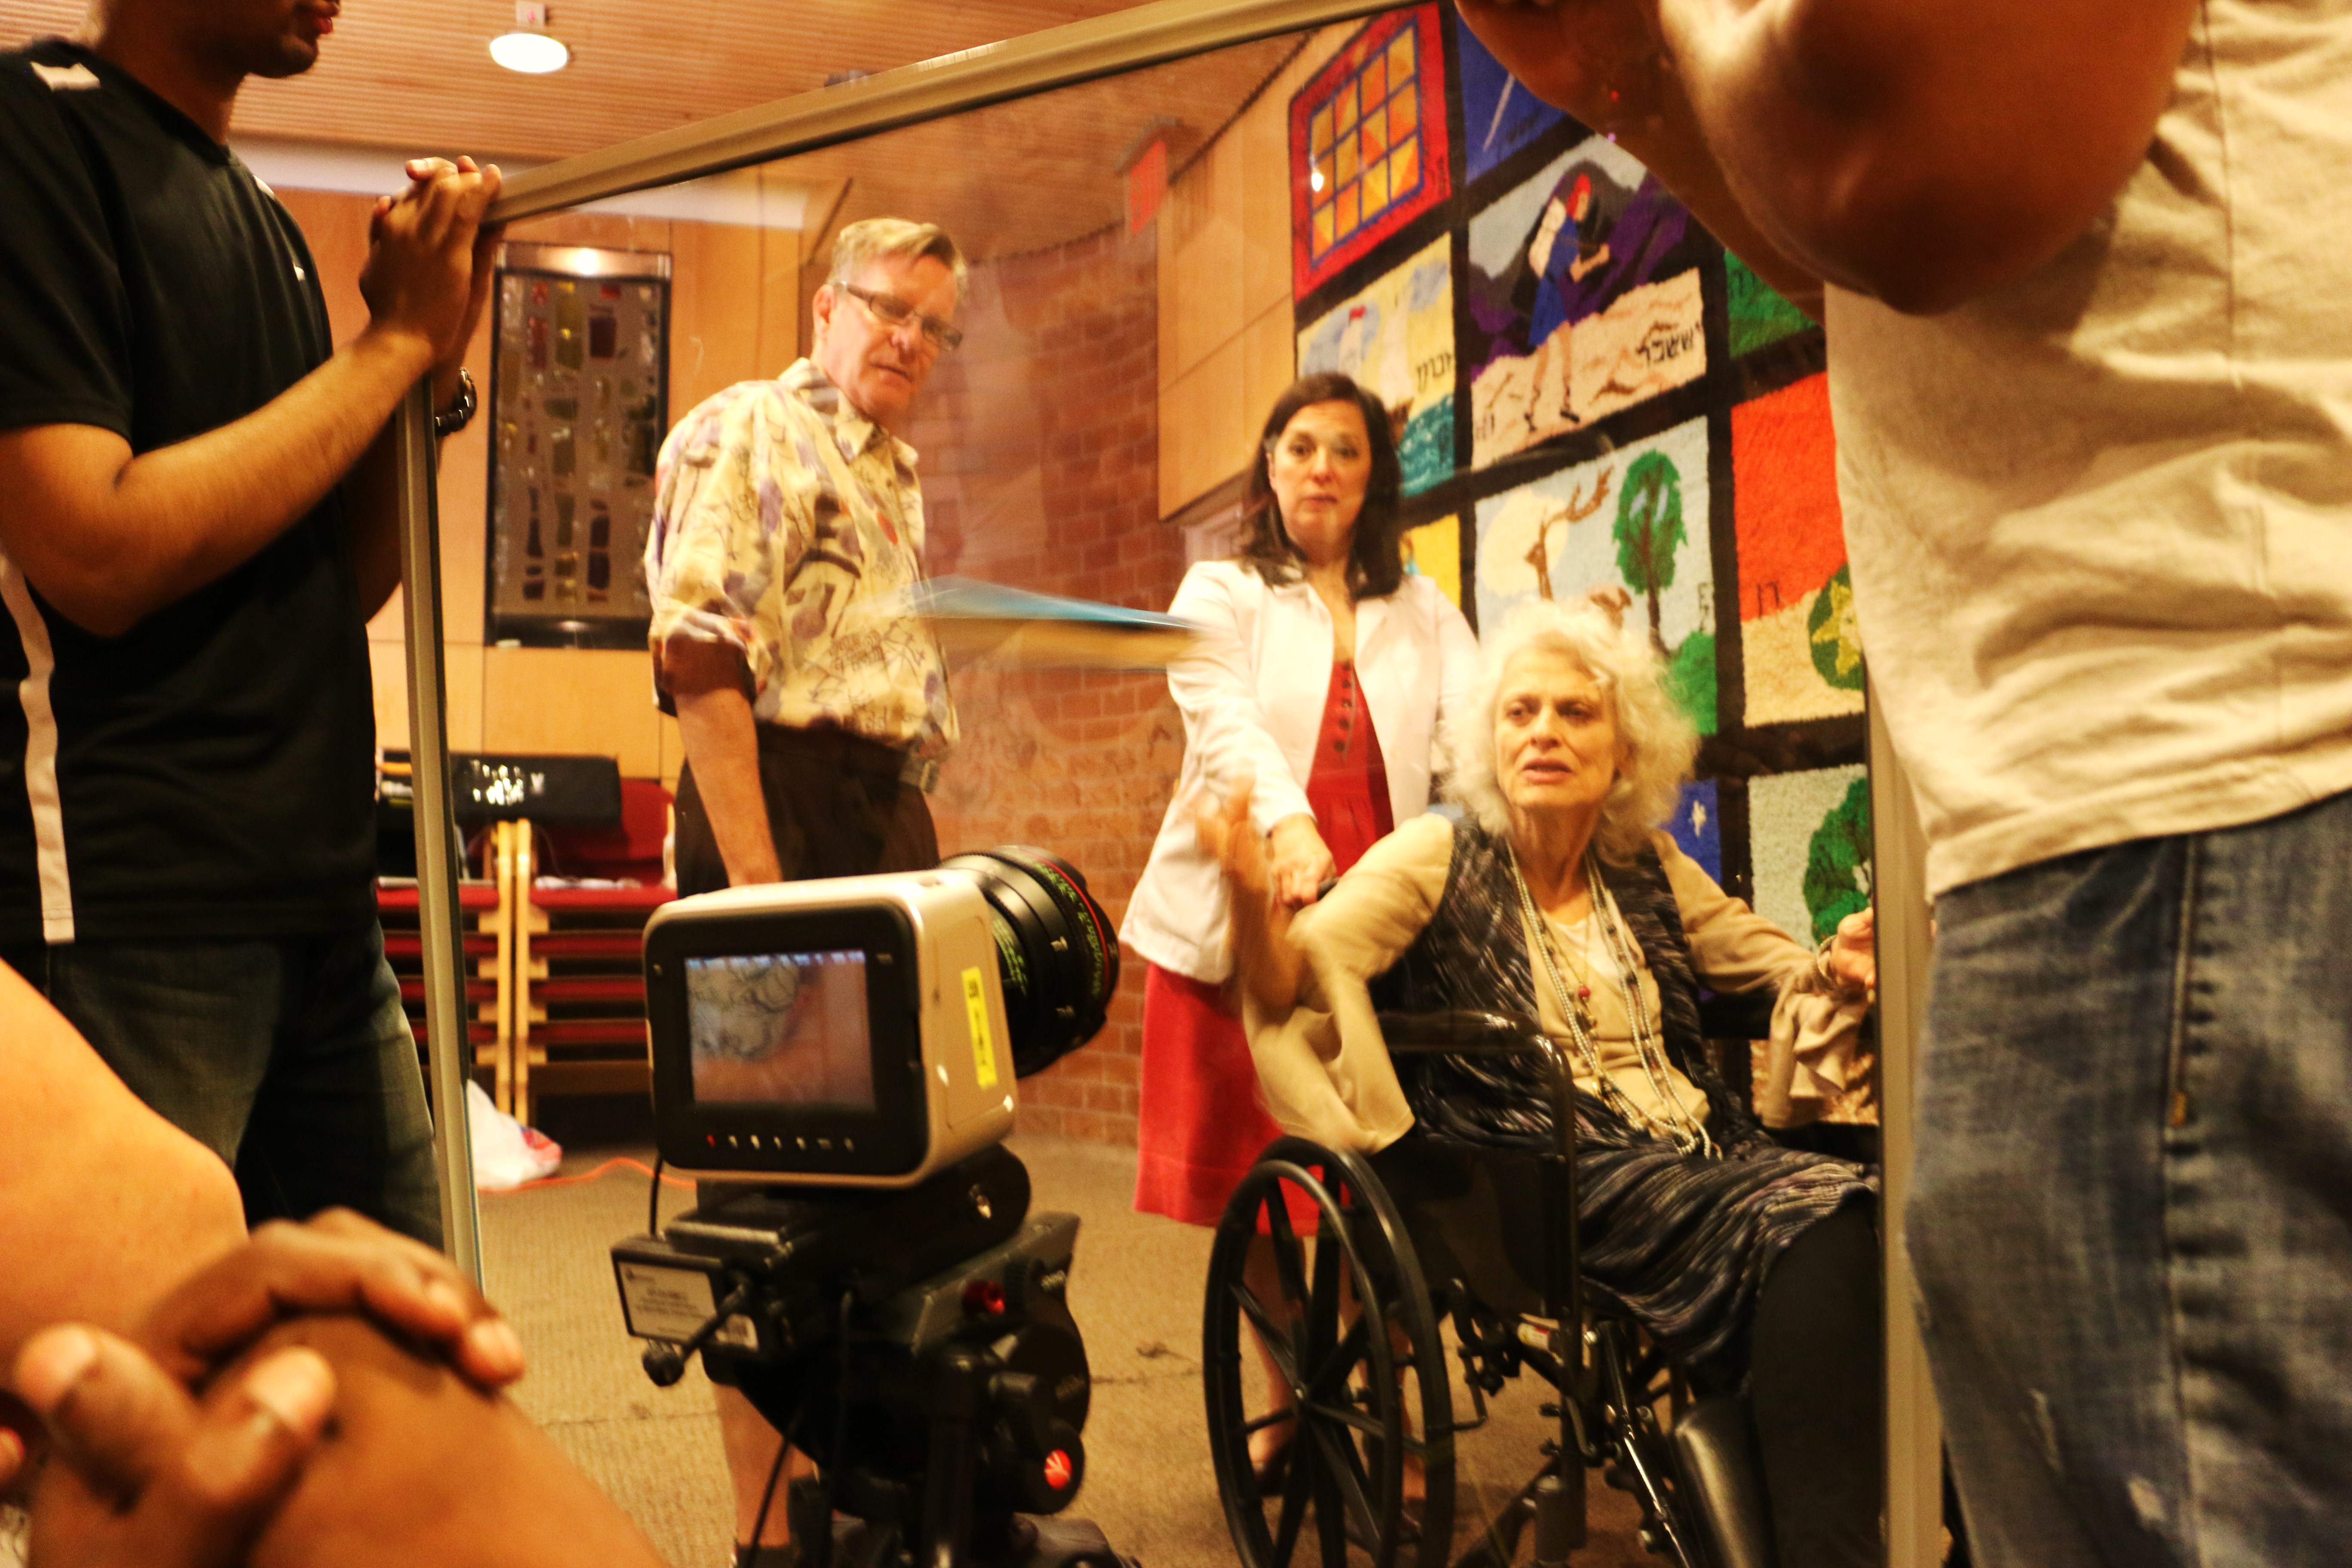 Judith Roberts throwing the book at the plexiglass, signaling the end of filming. Sept. 12, 2014.